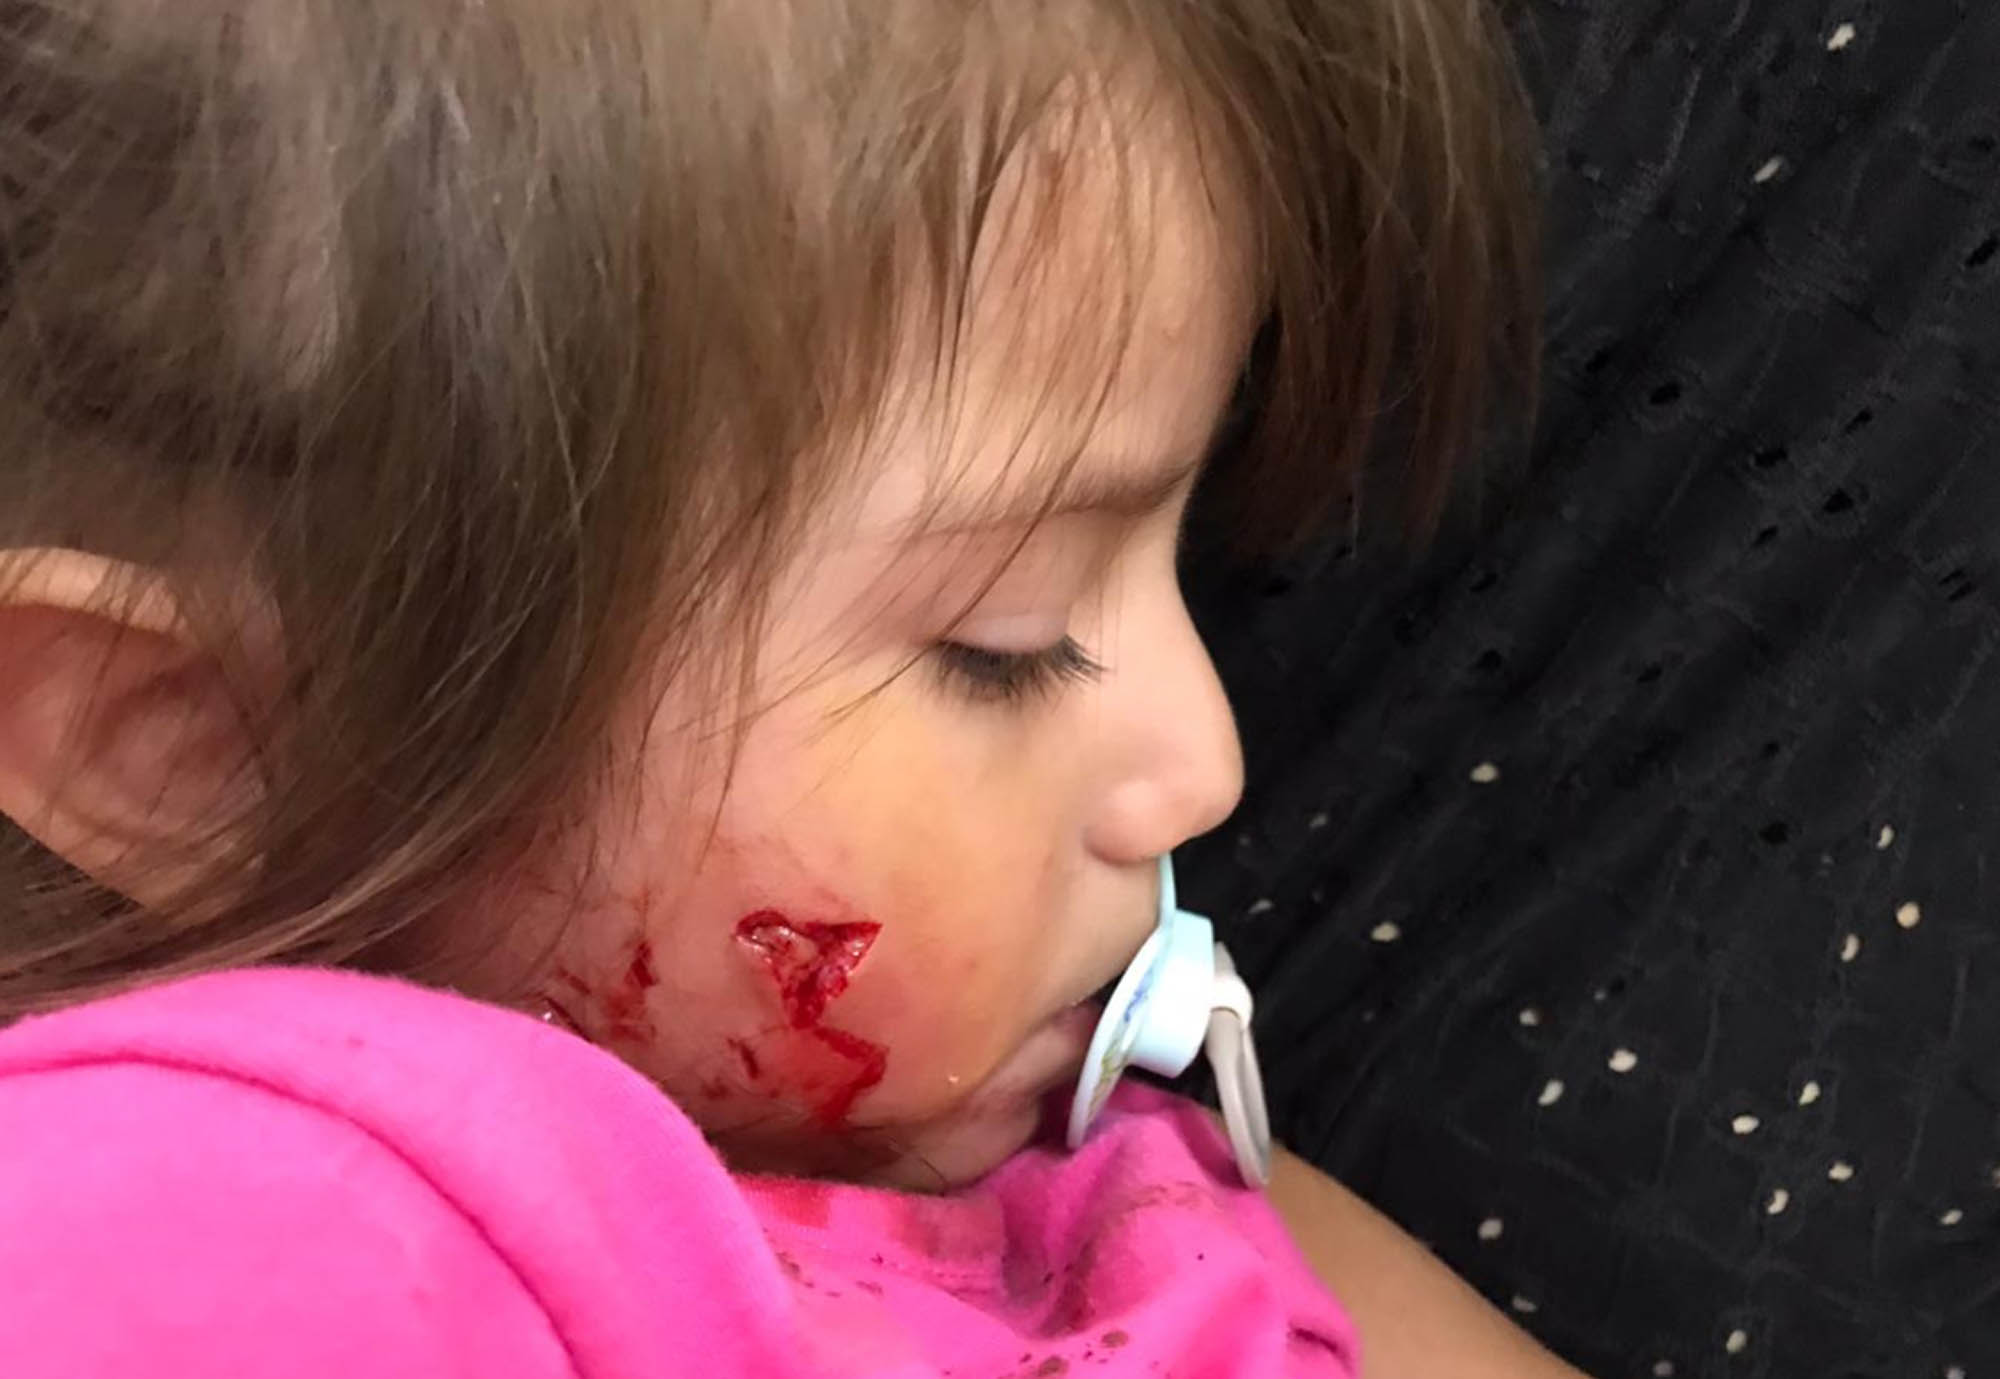 Read more about the article Dog Savages Toddlers Face In Front Of Shocked Mum